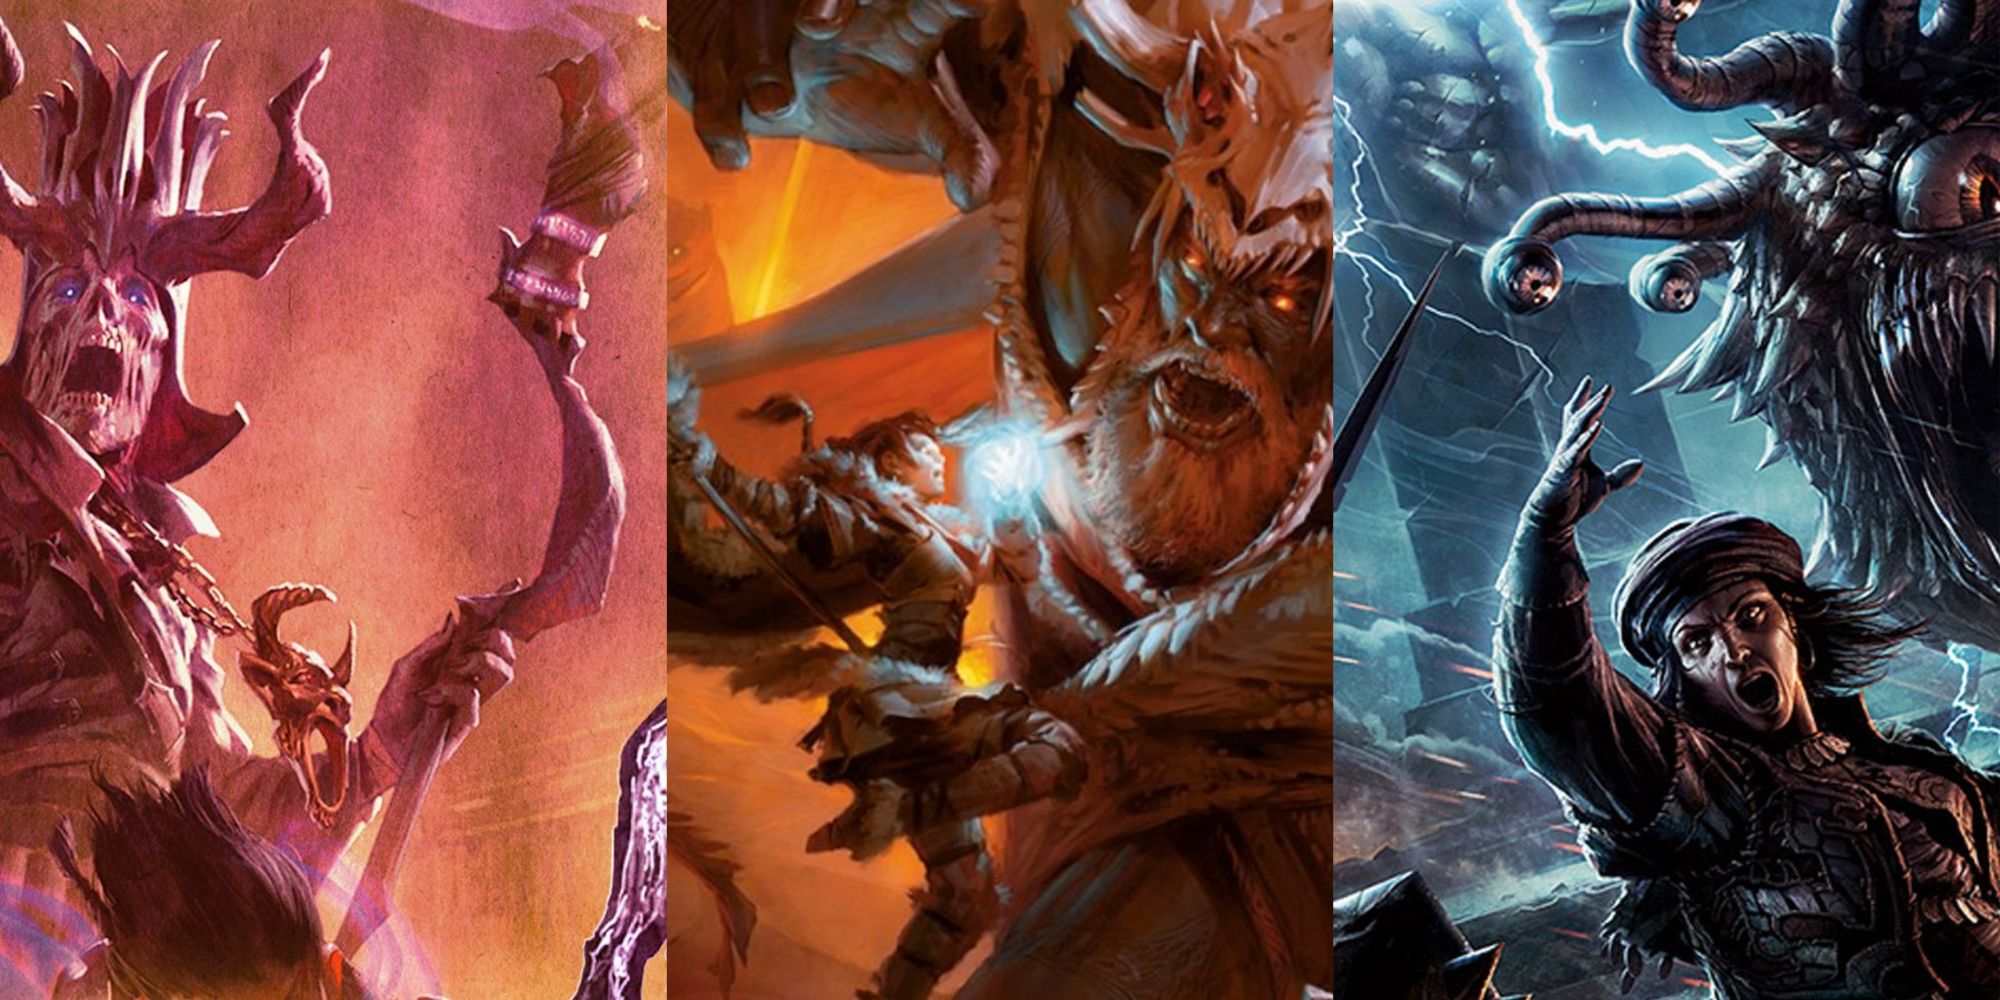 D&D collage of the three core rulebook covers